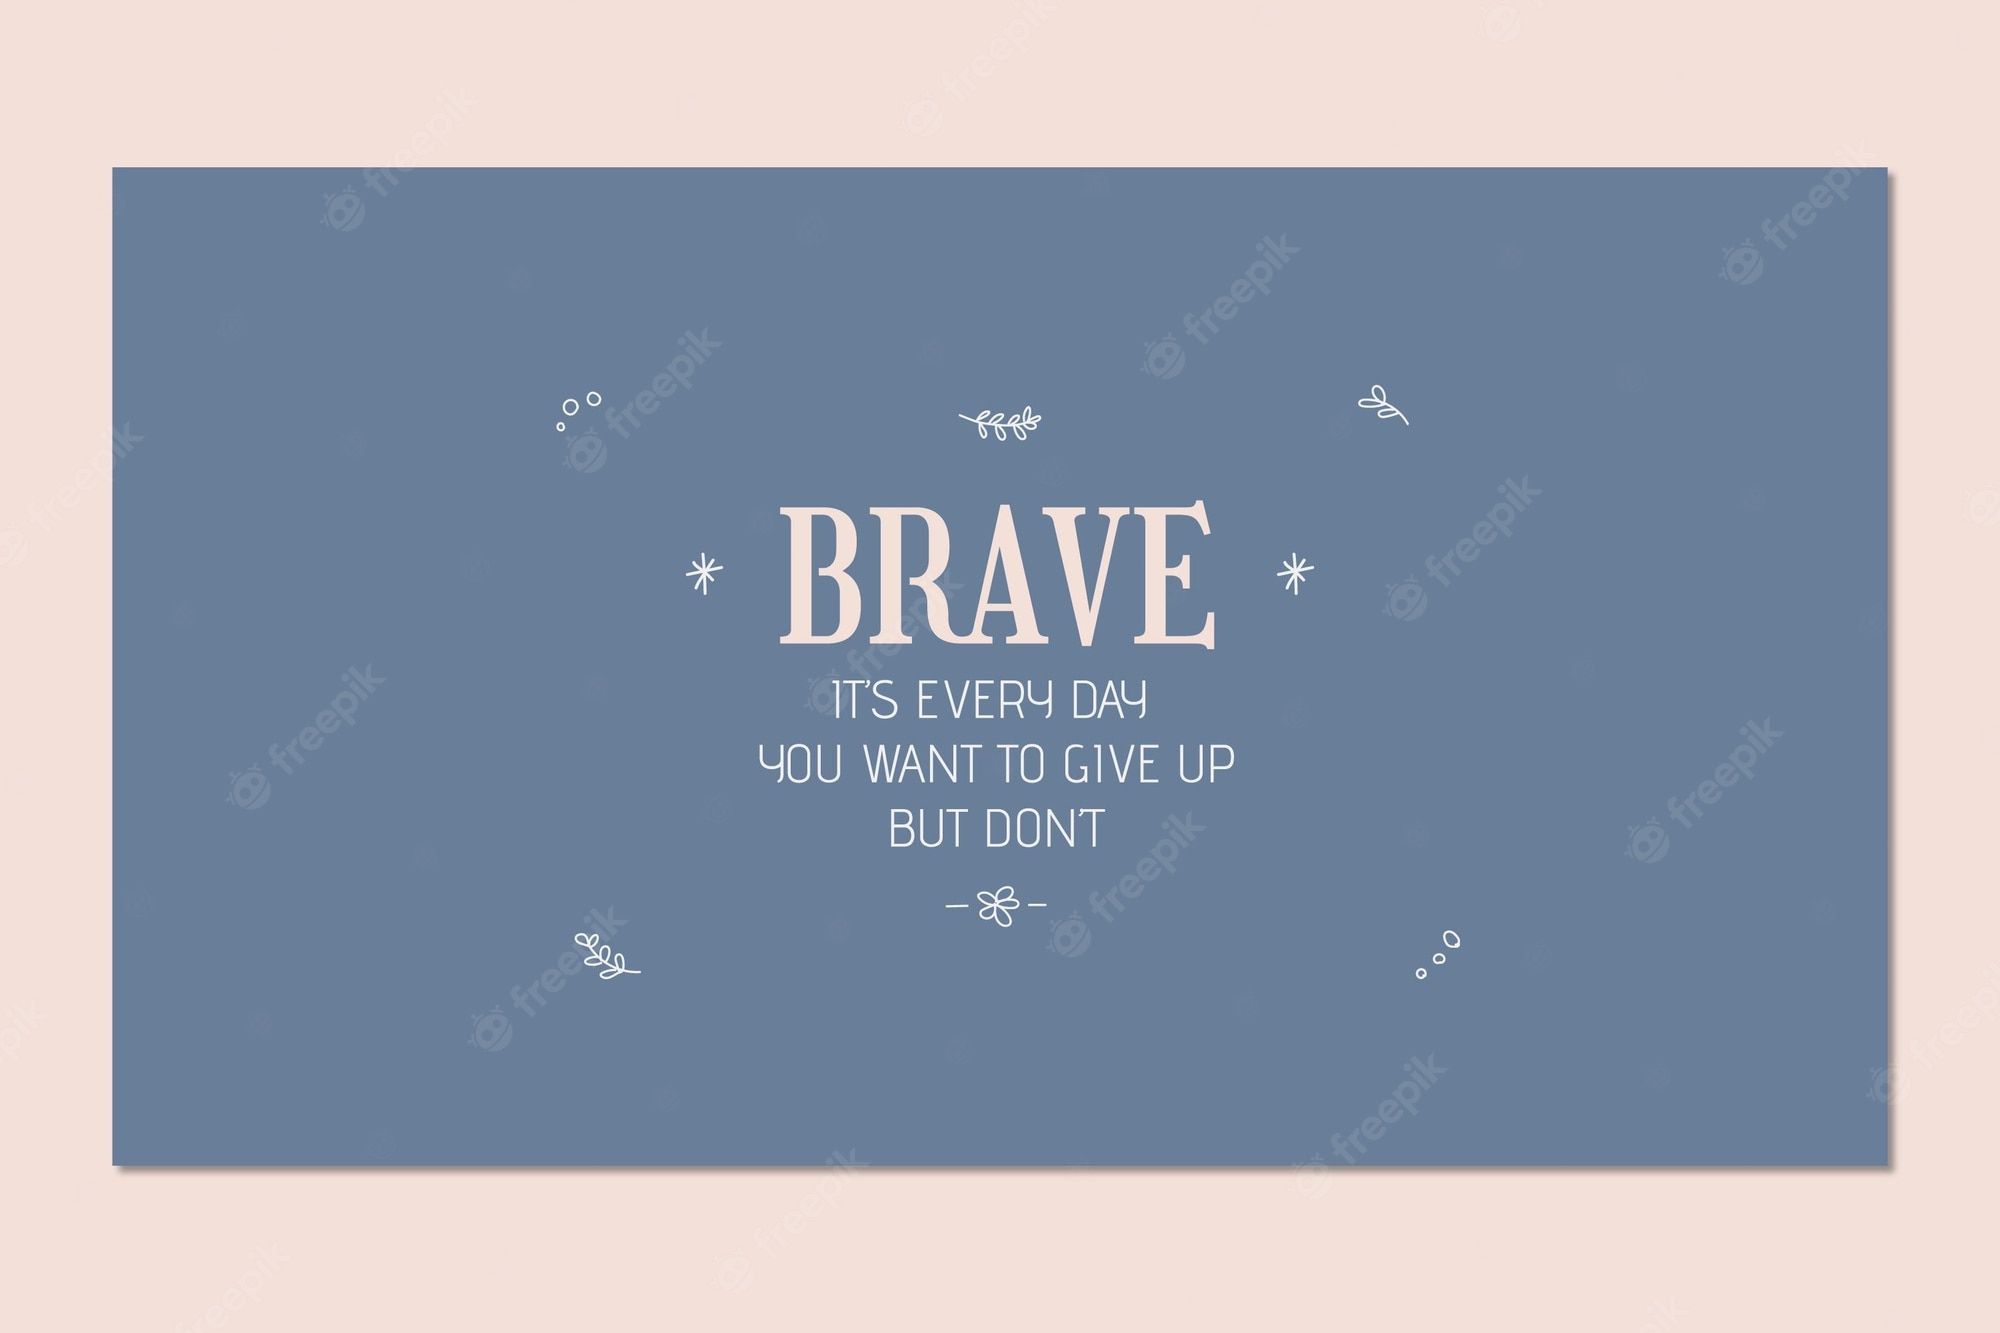 Brave, it's every day you want to give up but don't. - Doodles